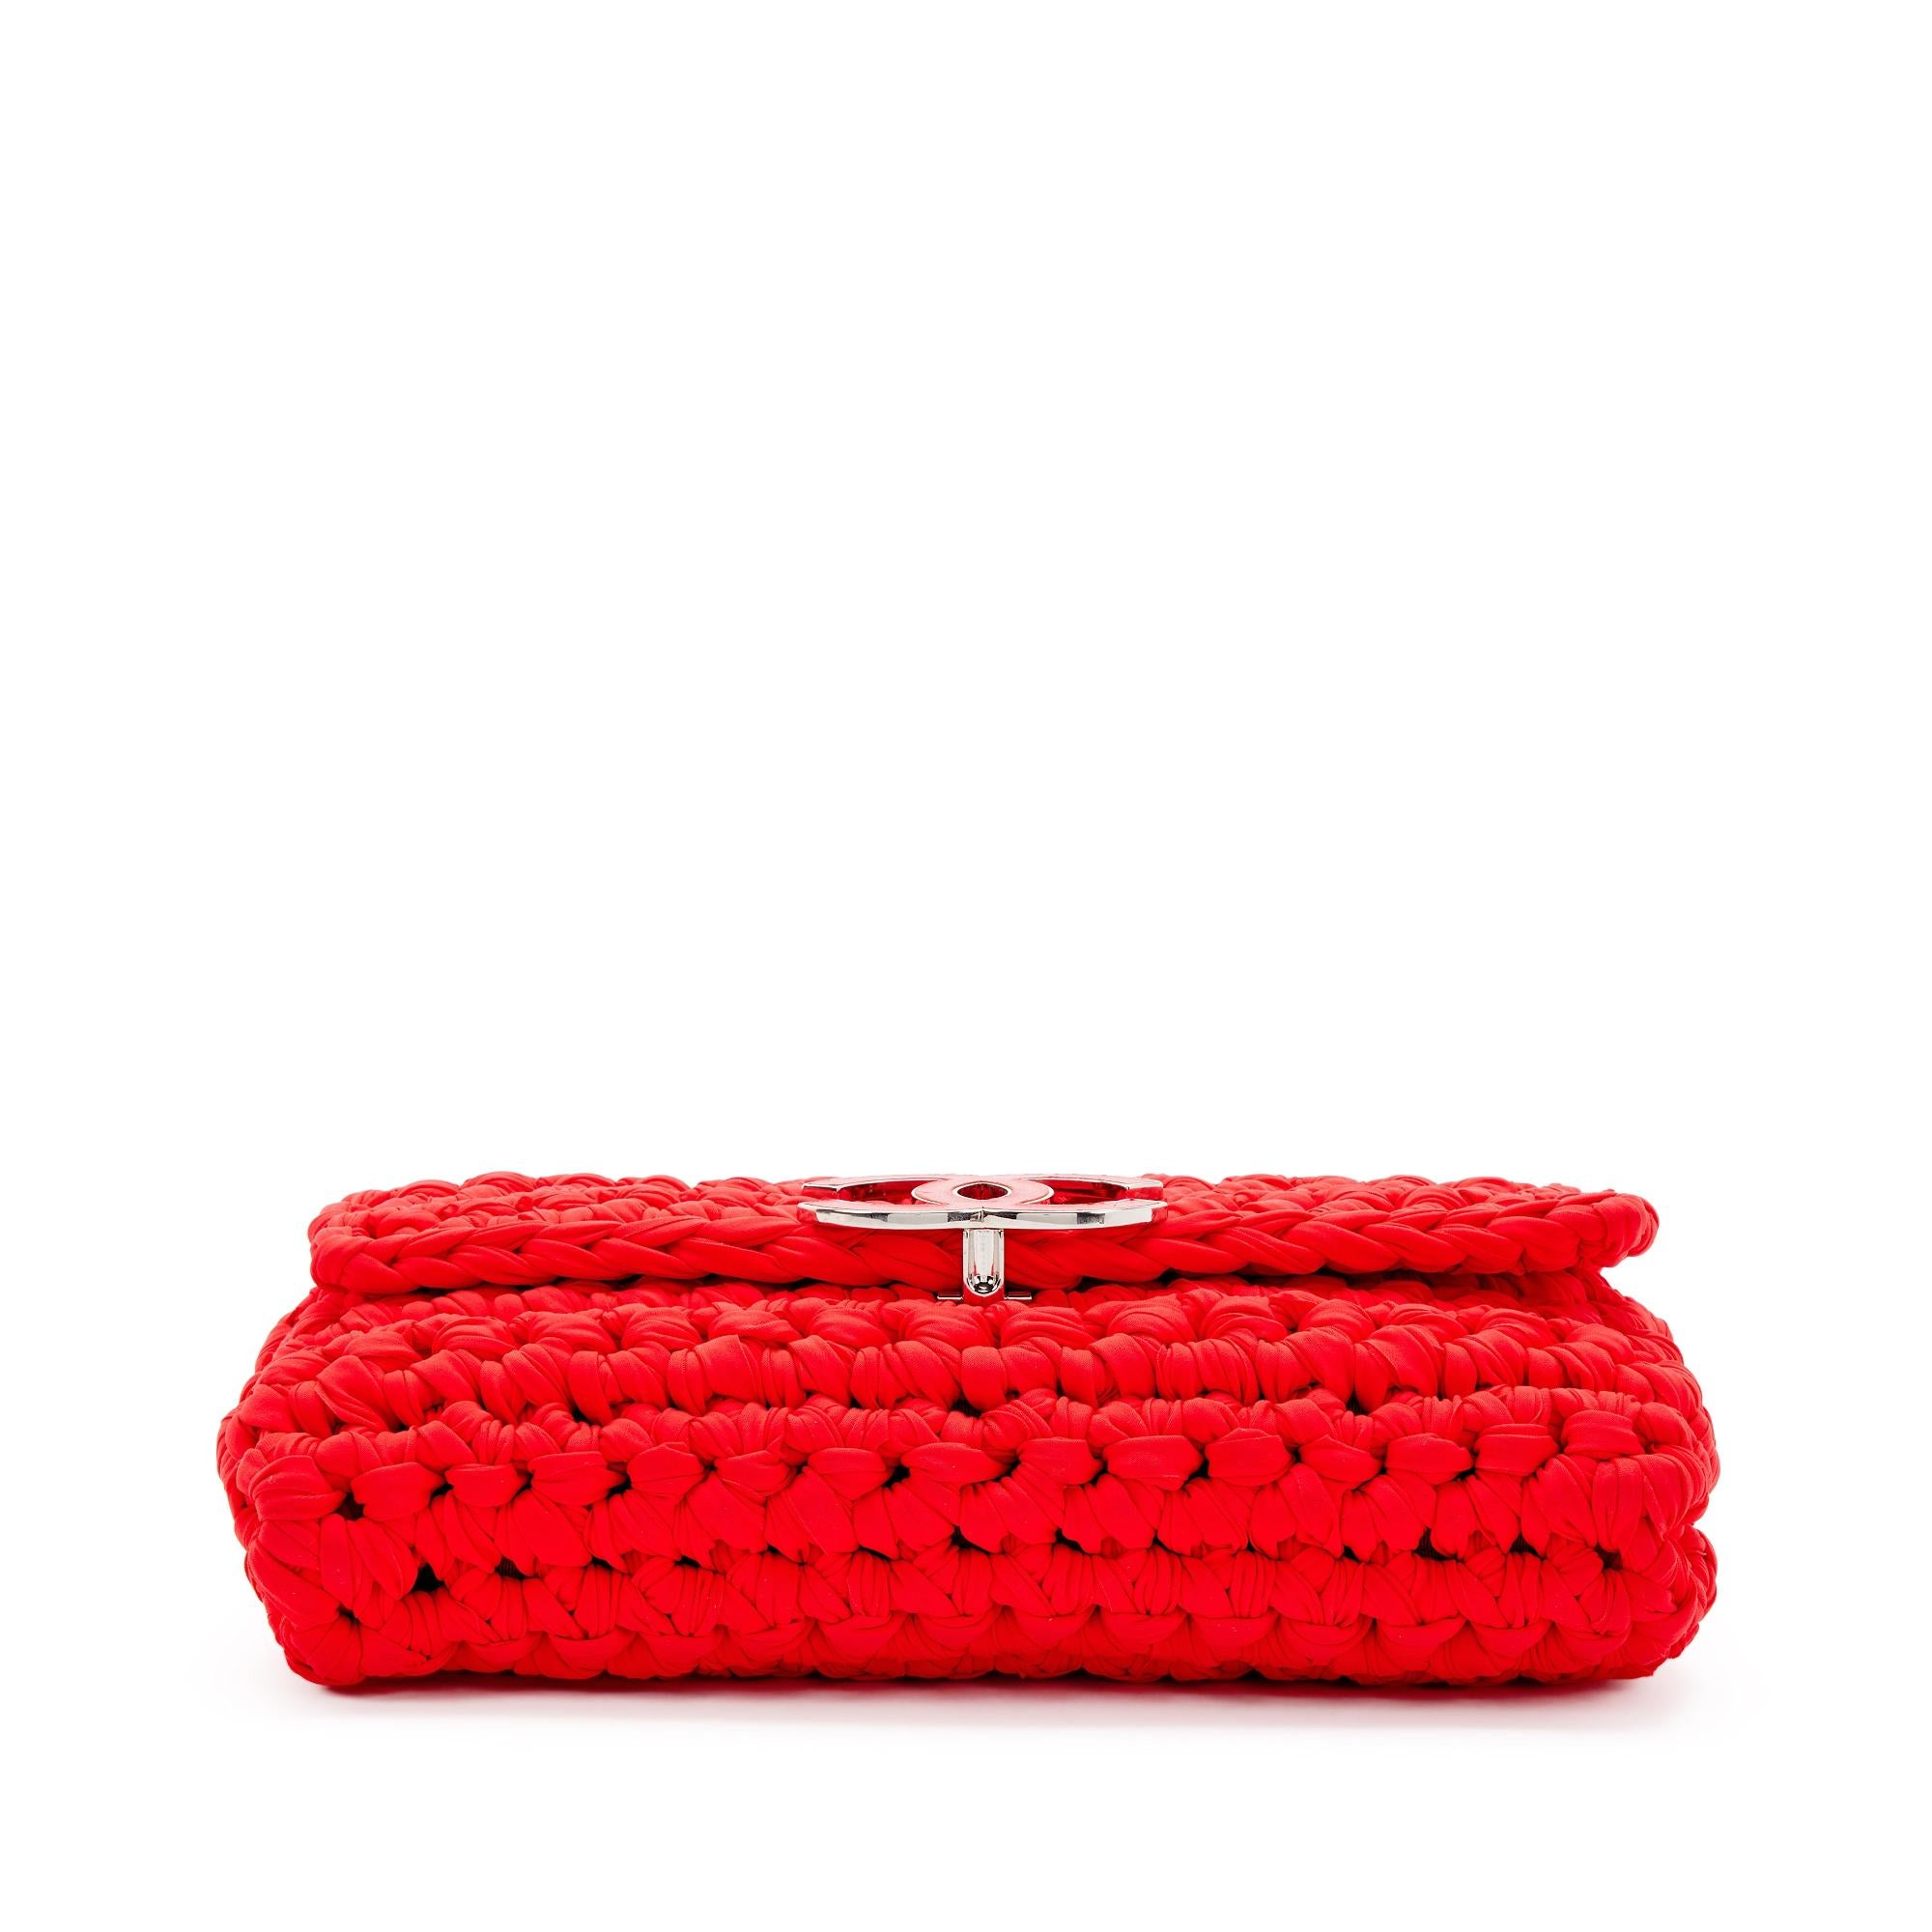 Chanel Red Cruise Crochet Logo Flap Bag For Sale 1